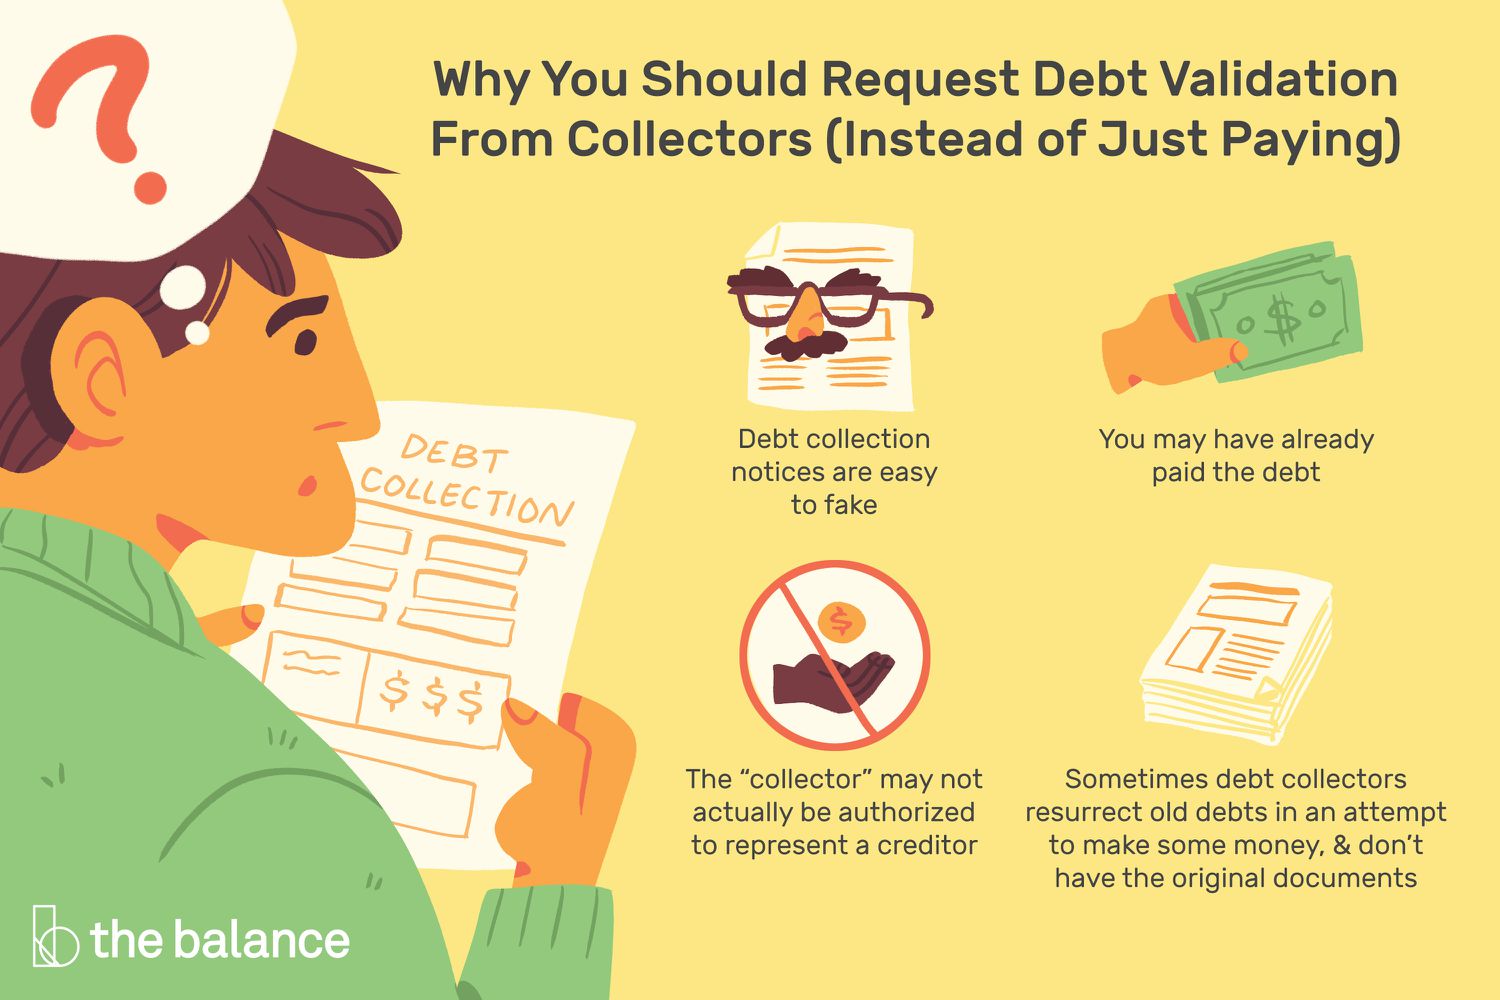 Image shows a person holding a bill with a question mark in a thought bubble above their head, representing the headline and text: why you should request a debt validation from collectors instead of just paying a debt: Debt collection notices are easy to fake. You may have already paid the debt. The “collector” may not actually be authorized to represent a creditor. Sometimes debt collectors resurrect old debts in an attempt to make some money, and don’t have the original documents